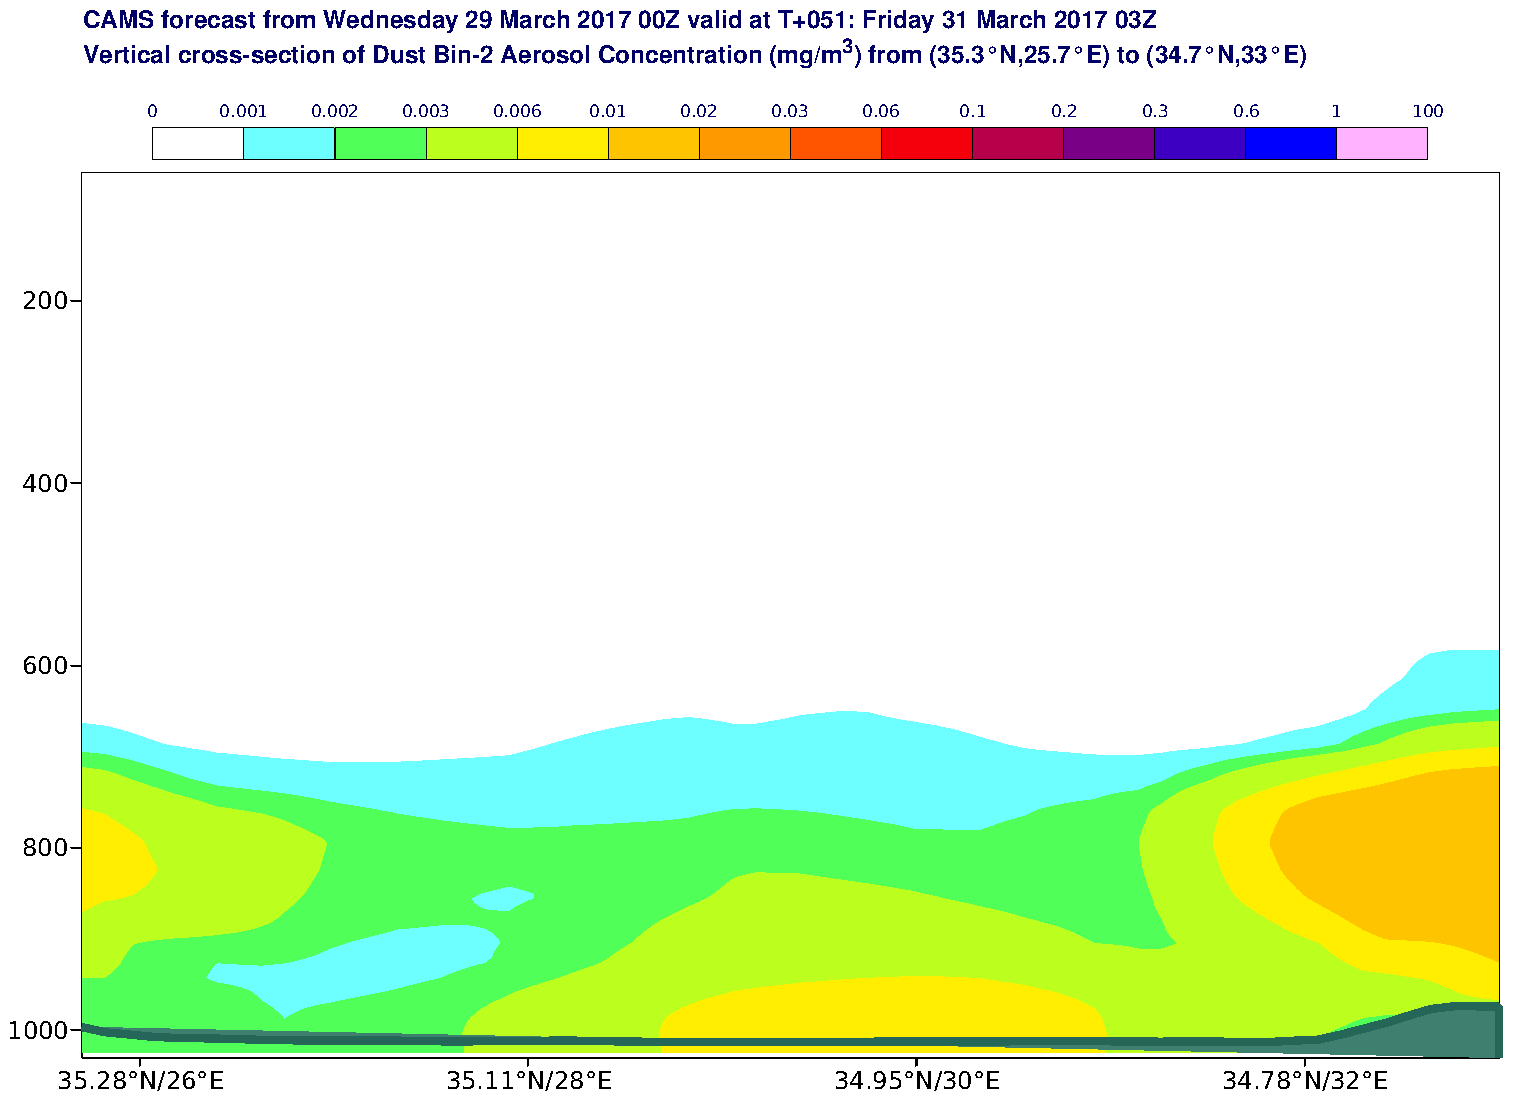 Vertical cross-section of Dust Bin-2 Aerosol Concentration (mg/m3) valid at T51 - 2017-03-31 03:00